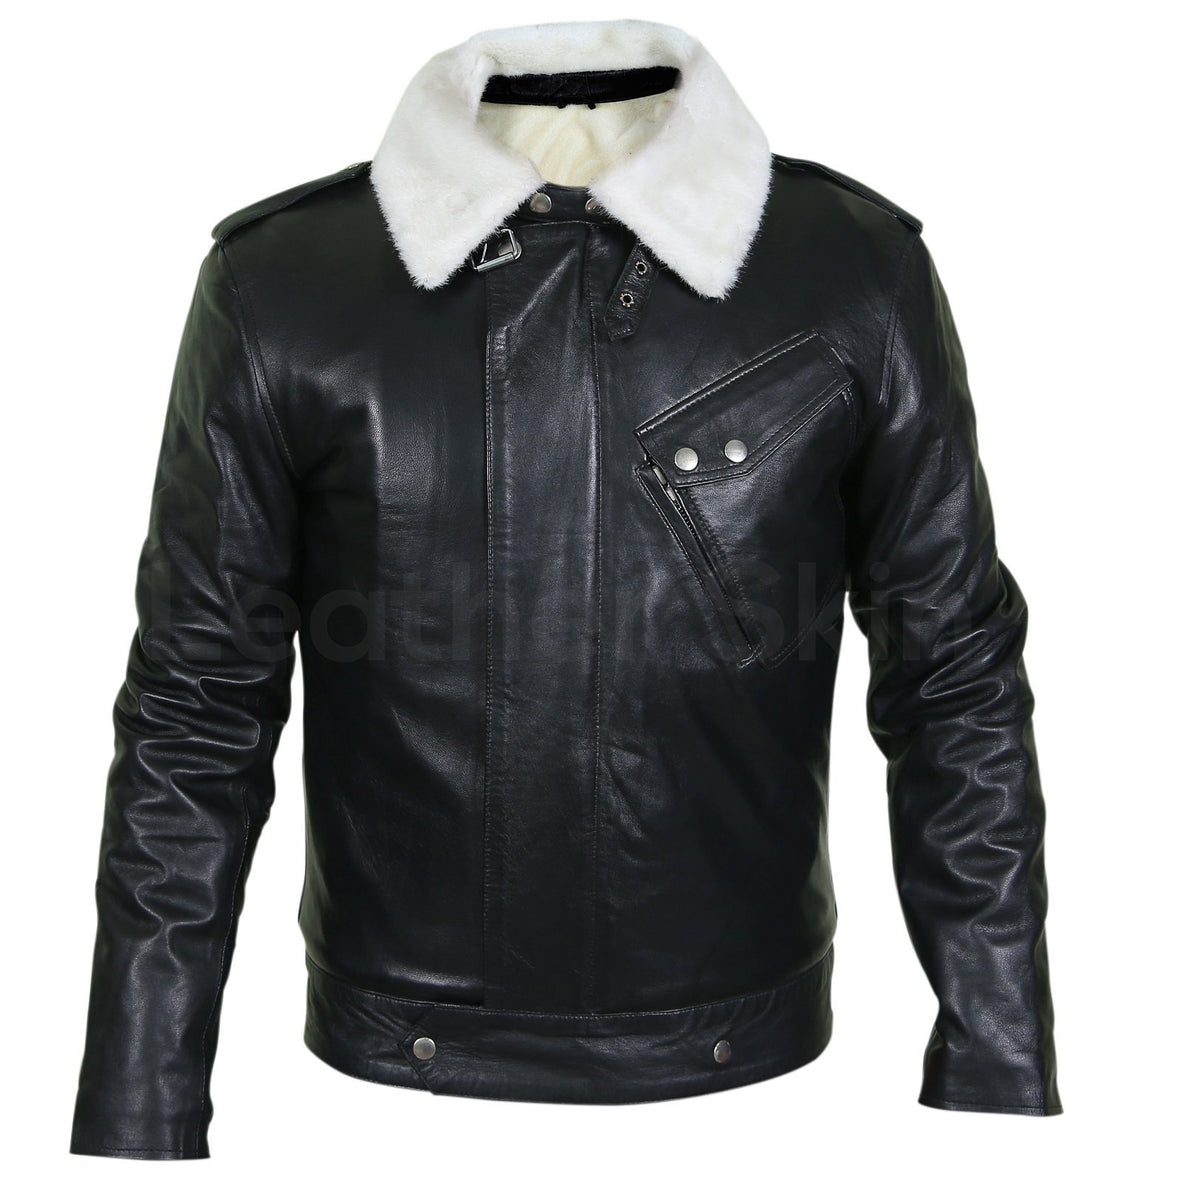 Men Black Genuine Leather Jacket with White Fur Collar - Leather